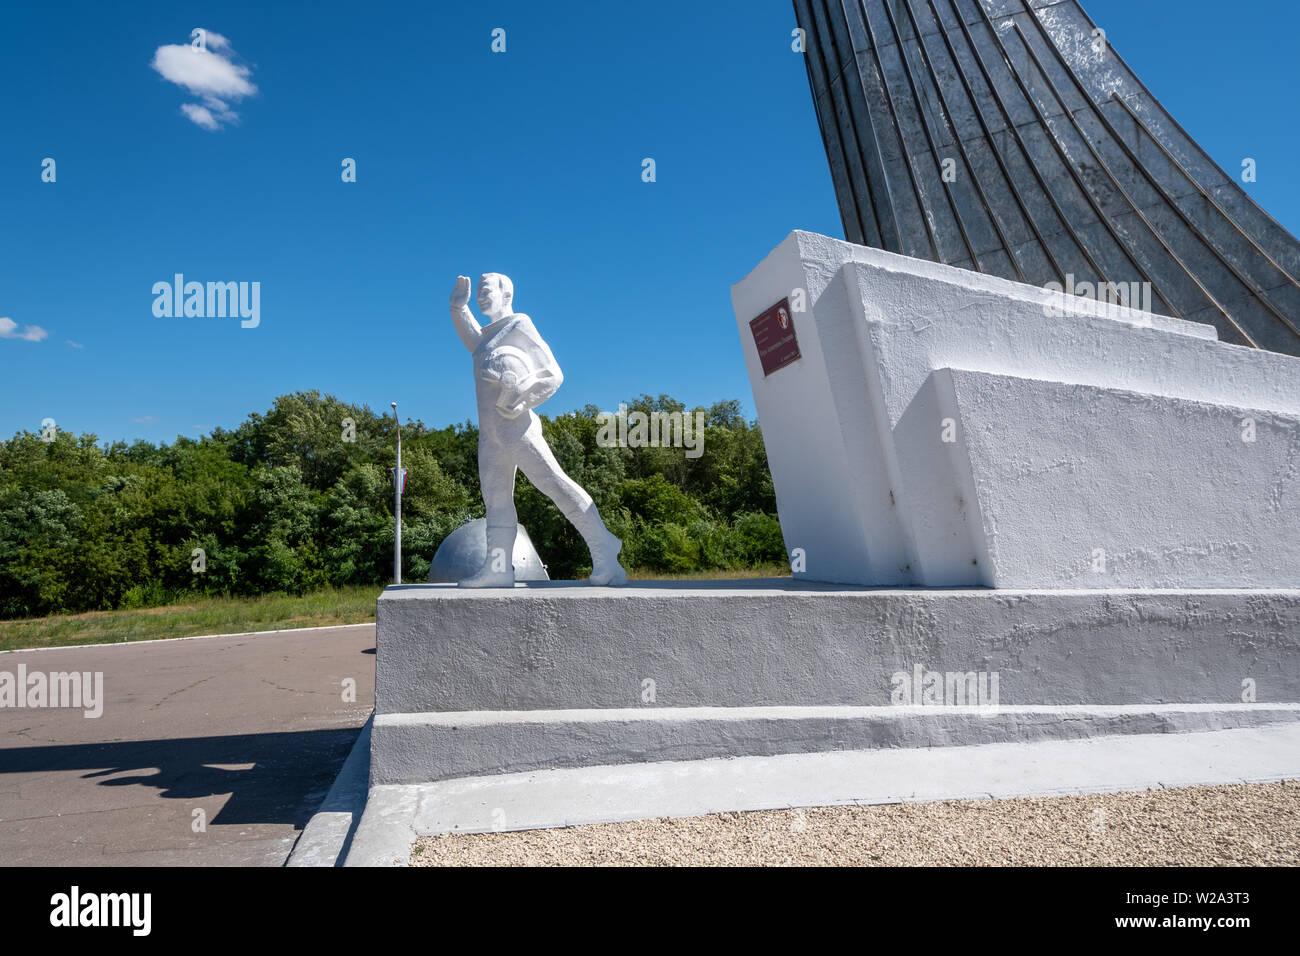 SMELOVKA, SARATOV, RUSSIA - JULY 2019: Place of landing of the first cosmonaut Yuri Gagarin. Monument. Stock Photo